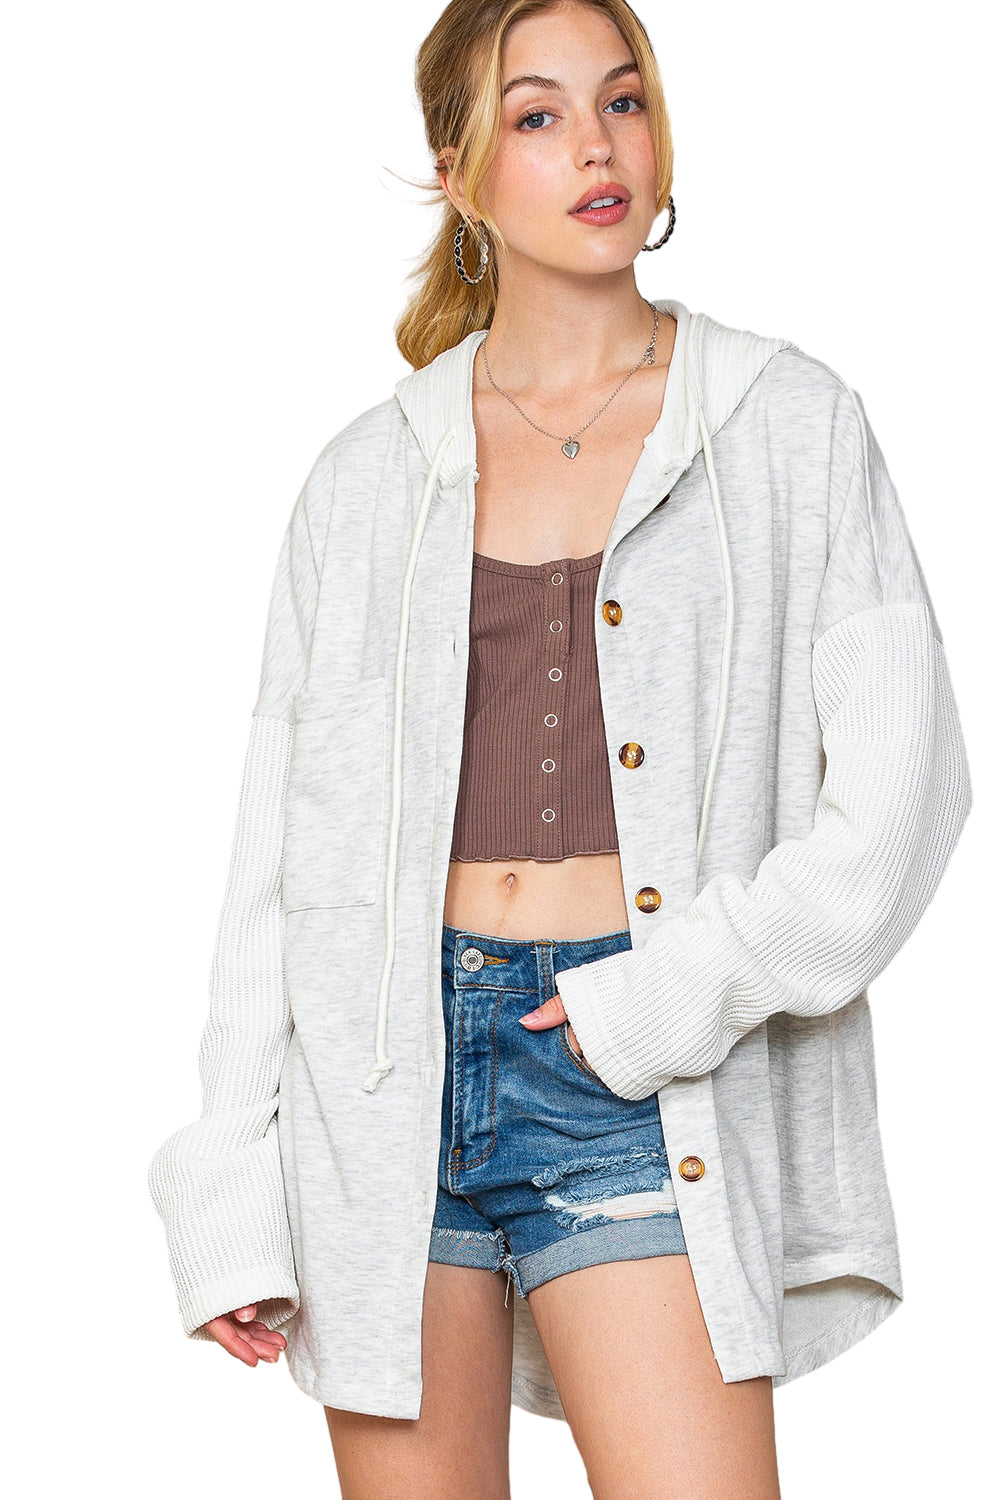 Gray Button Up Contrast Knitted Sleeves Hooded Jacket